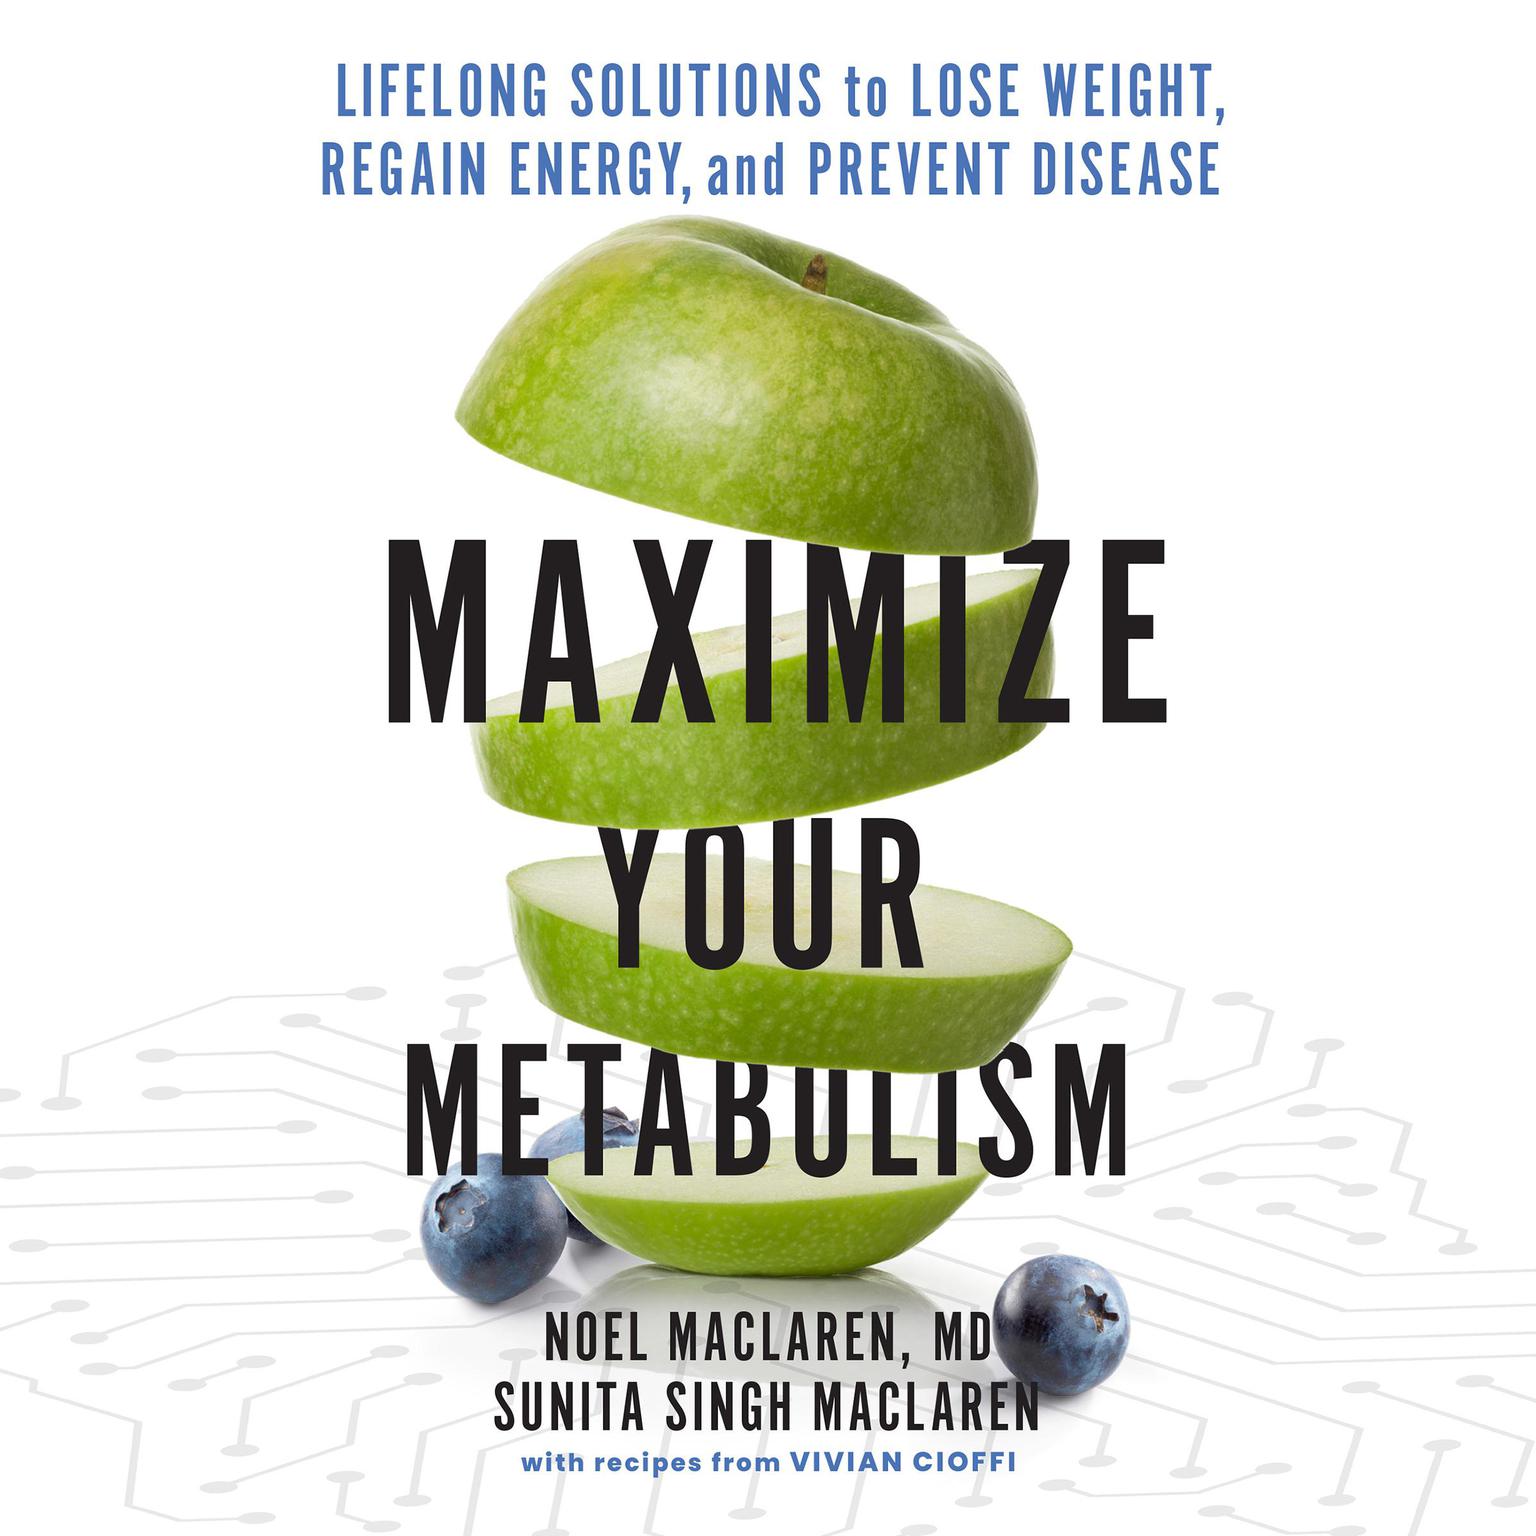 Maximize Your Metabolism: Lifelong Solutions to Lose Weight, Restore Energy, and Prevent Disease Audiobook, by Noel Maclaren